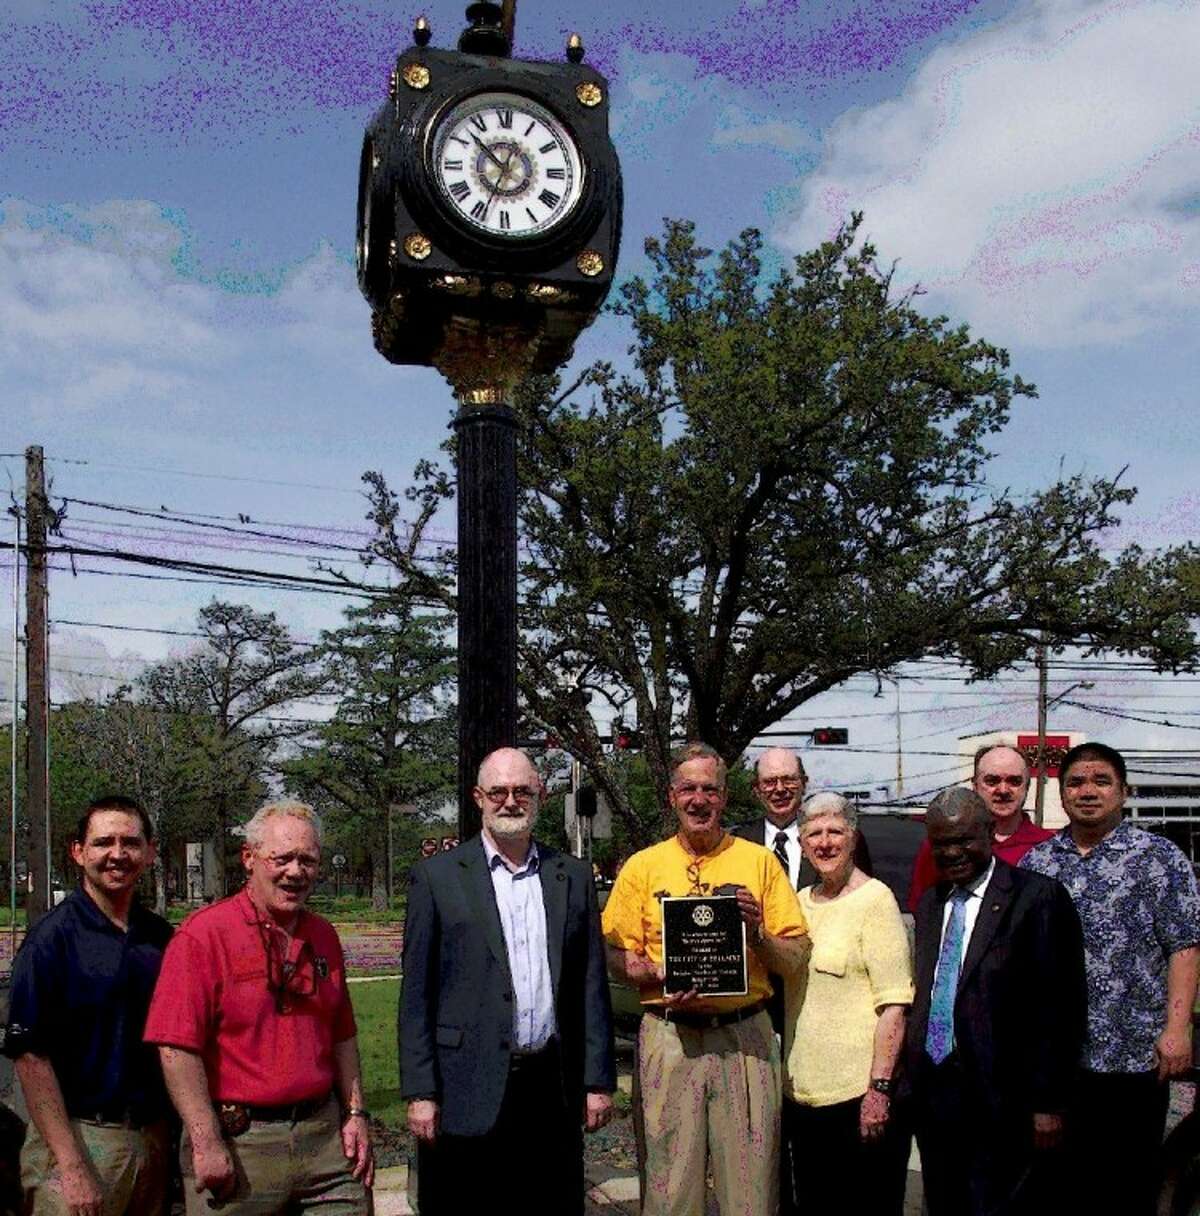 Rotarians gather to place commemorative plaque on Bellaire’s newest landmark - an old world clock tower in Paseo Park. Pictured L to R: Matt Lopez, Bellaire Assistant Chief of Police Byron Holloway, David Truran of Keller Williams Realty, club president Ed Seale, Tradition Bank CEO Craig Wooten, Judy Harwell, financial planner Surpris Cherazard, CPA Ralph Rieger, and Trung Doan, founder of StudioRed architects who designed the placement and orchestrated the installation.